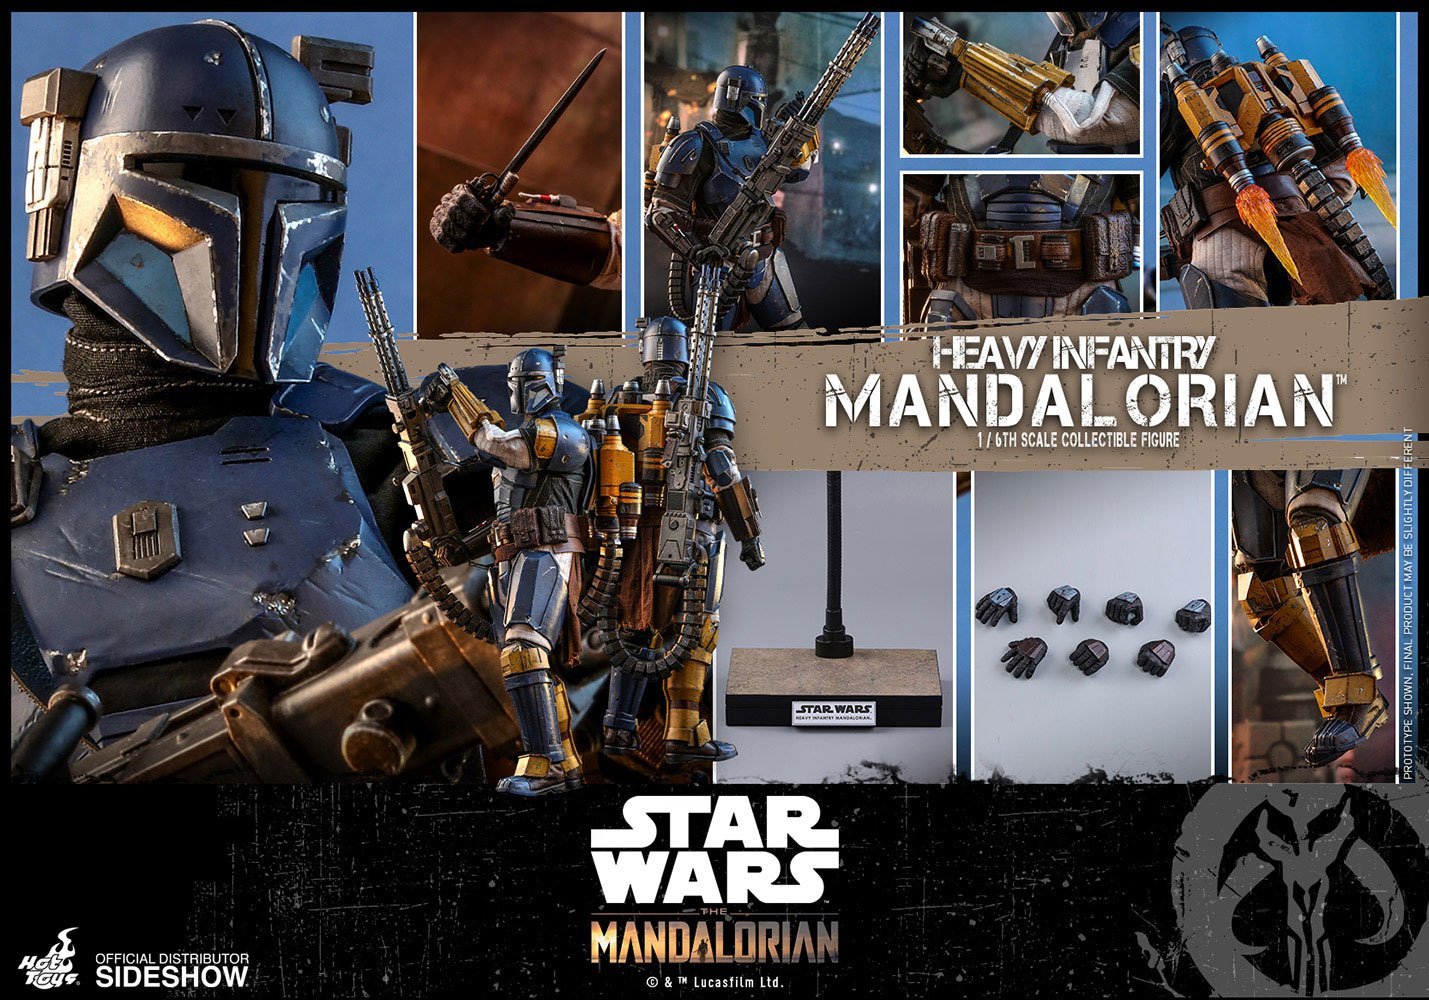 Hot Toys Star Wars The Mandalorian Action Figure 1/6 Heavy Infantry